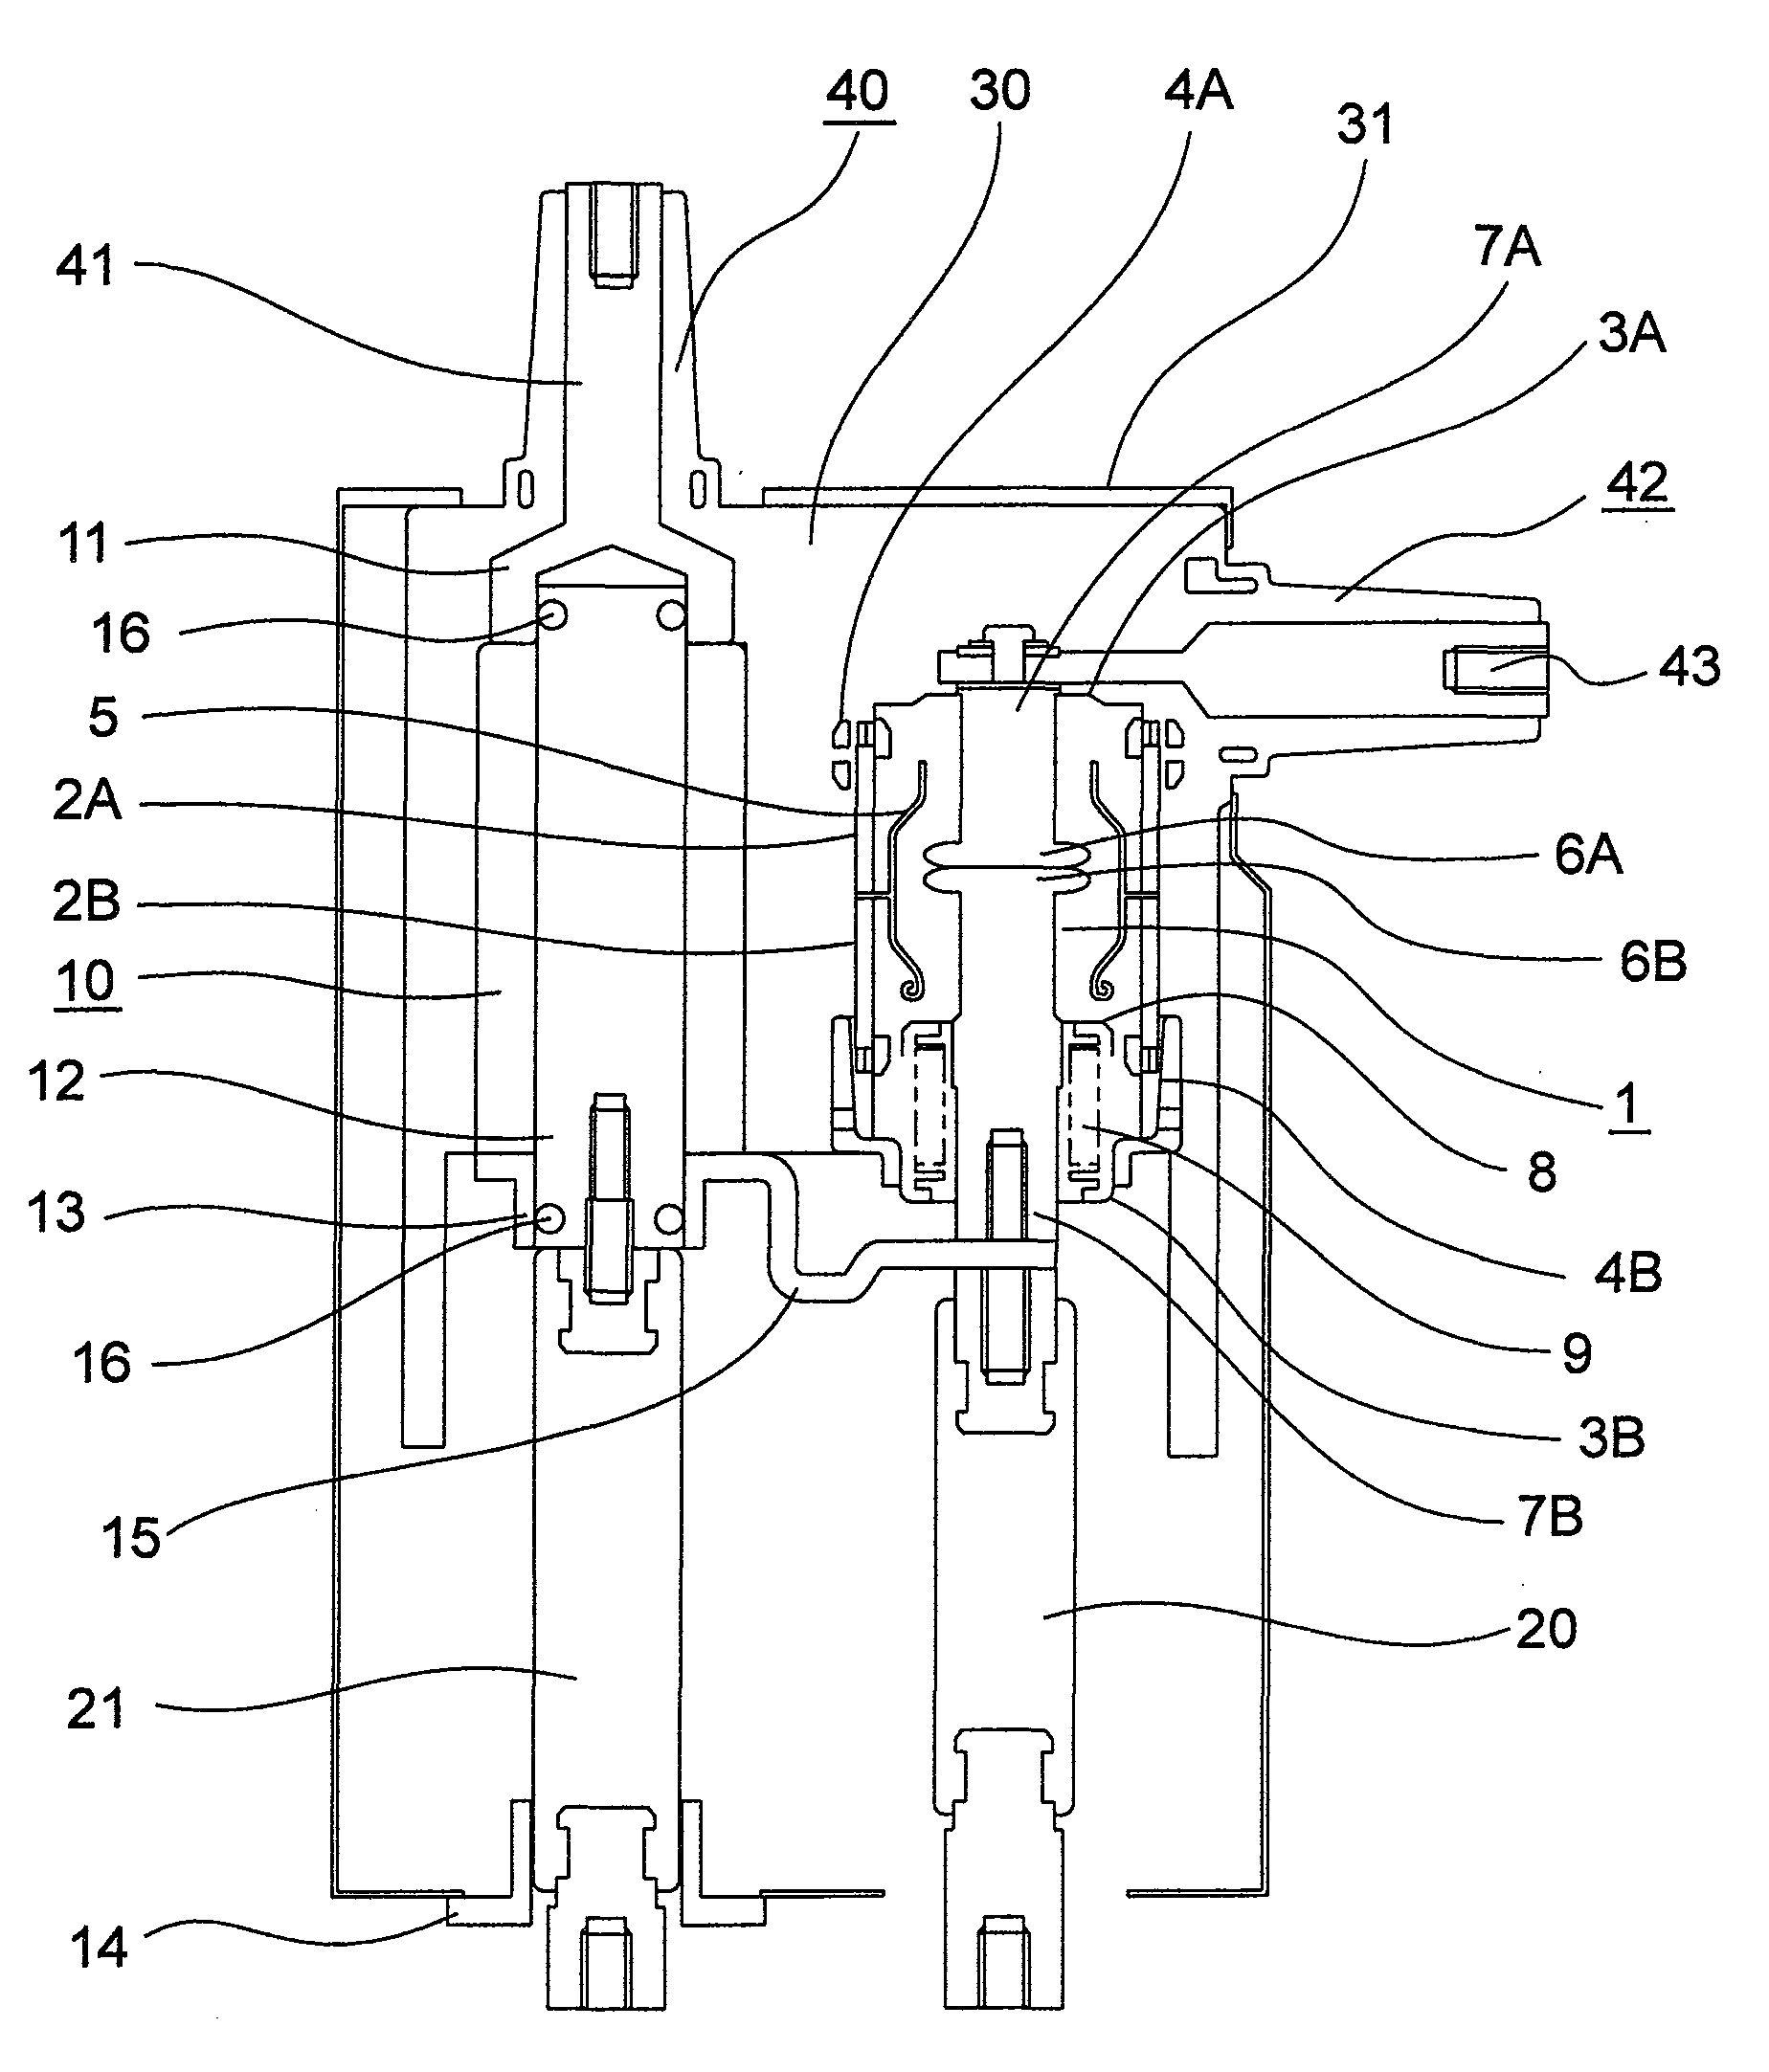 Switchgear and Method for Operating Switchgear